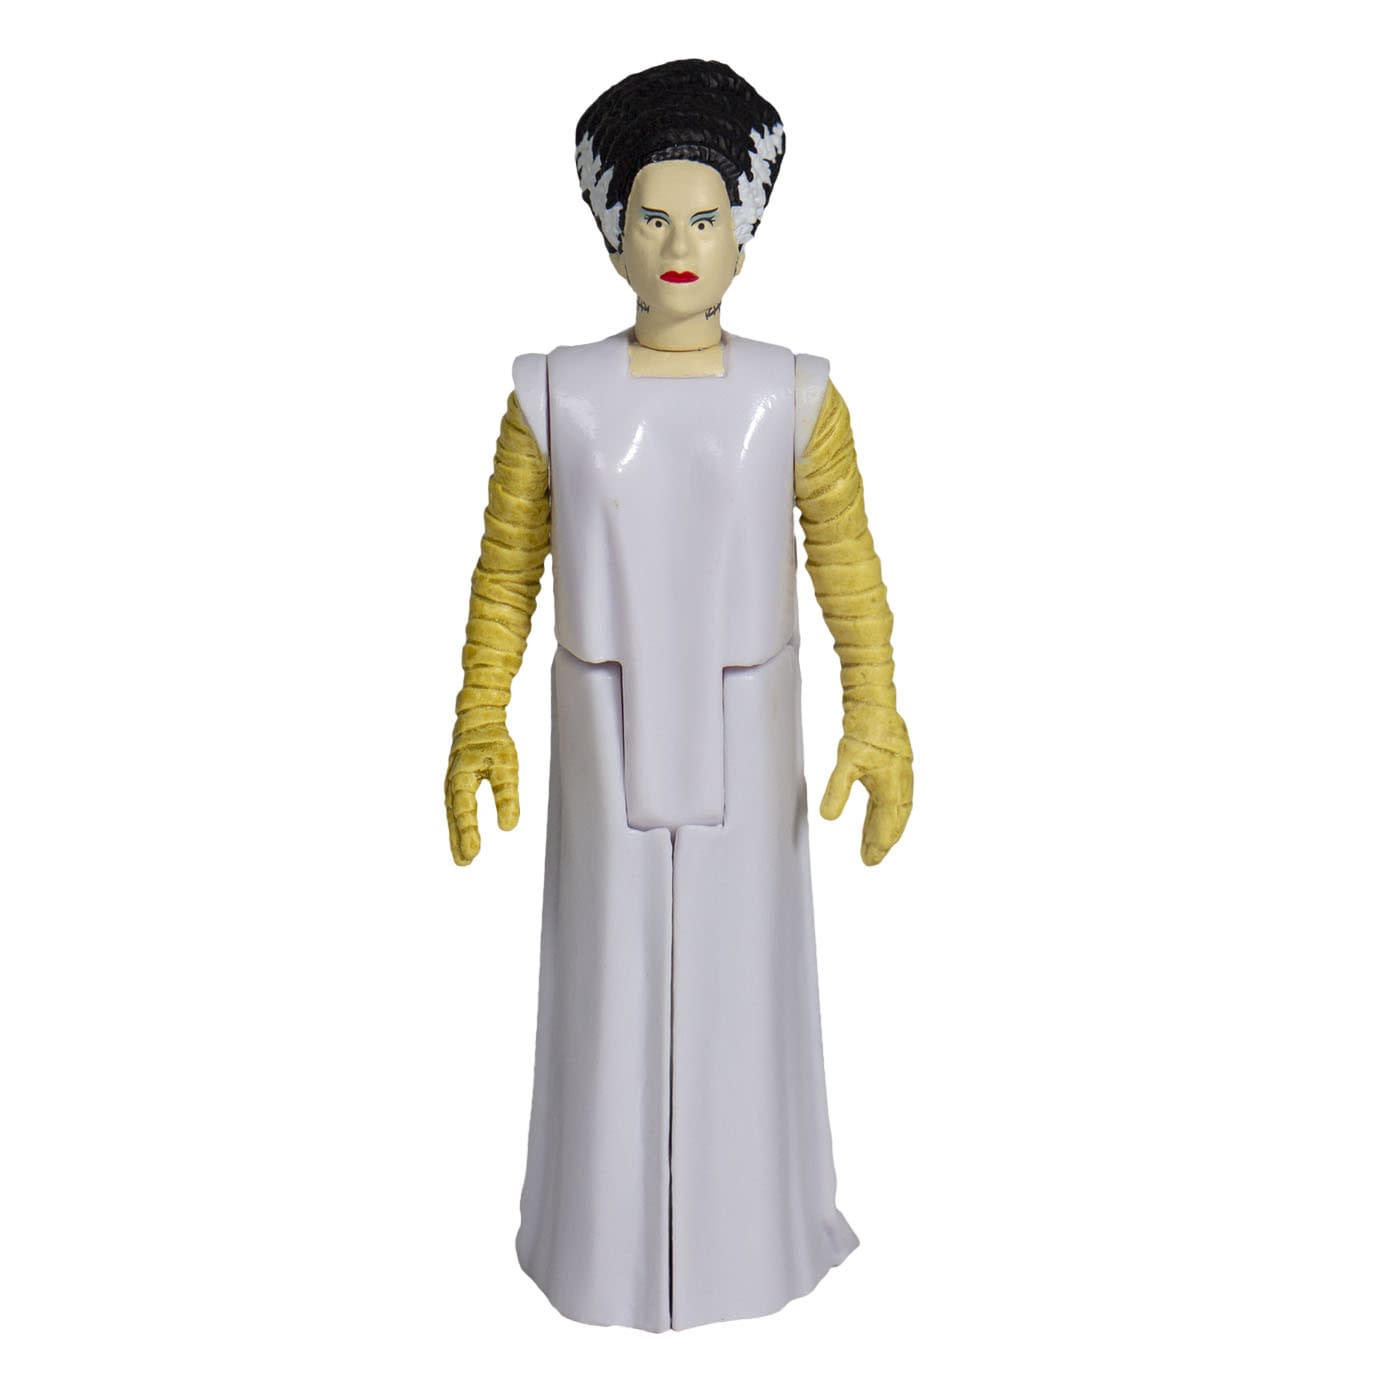 Universal Monsters Super7 Figures Are Here for Halloween  